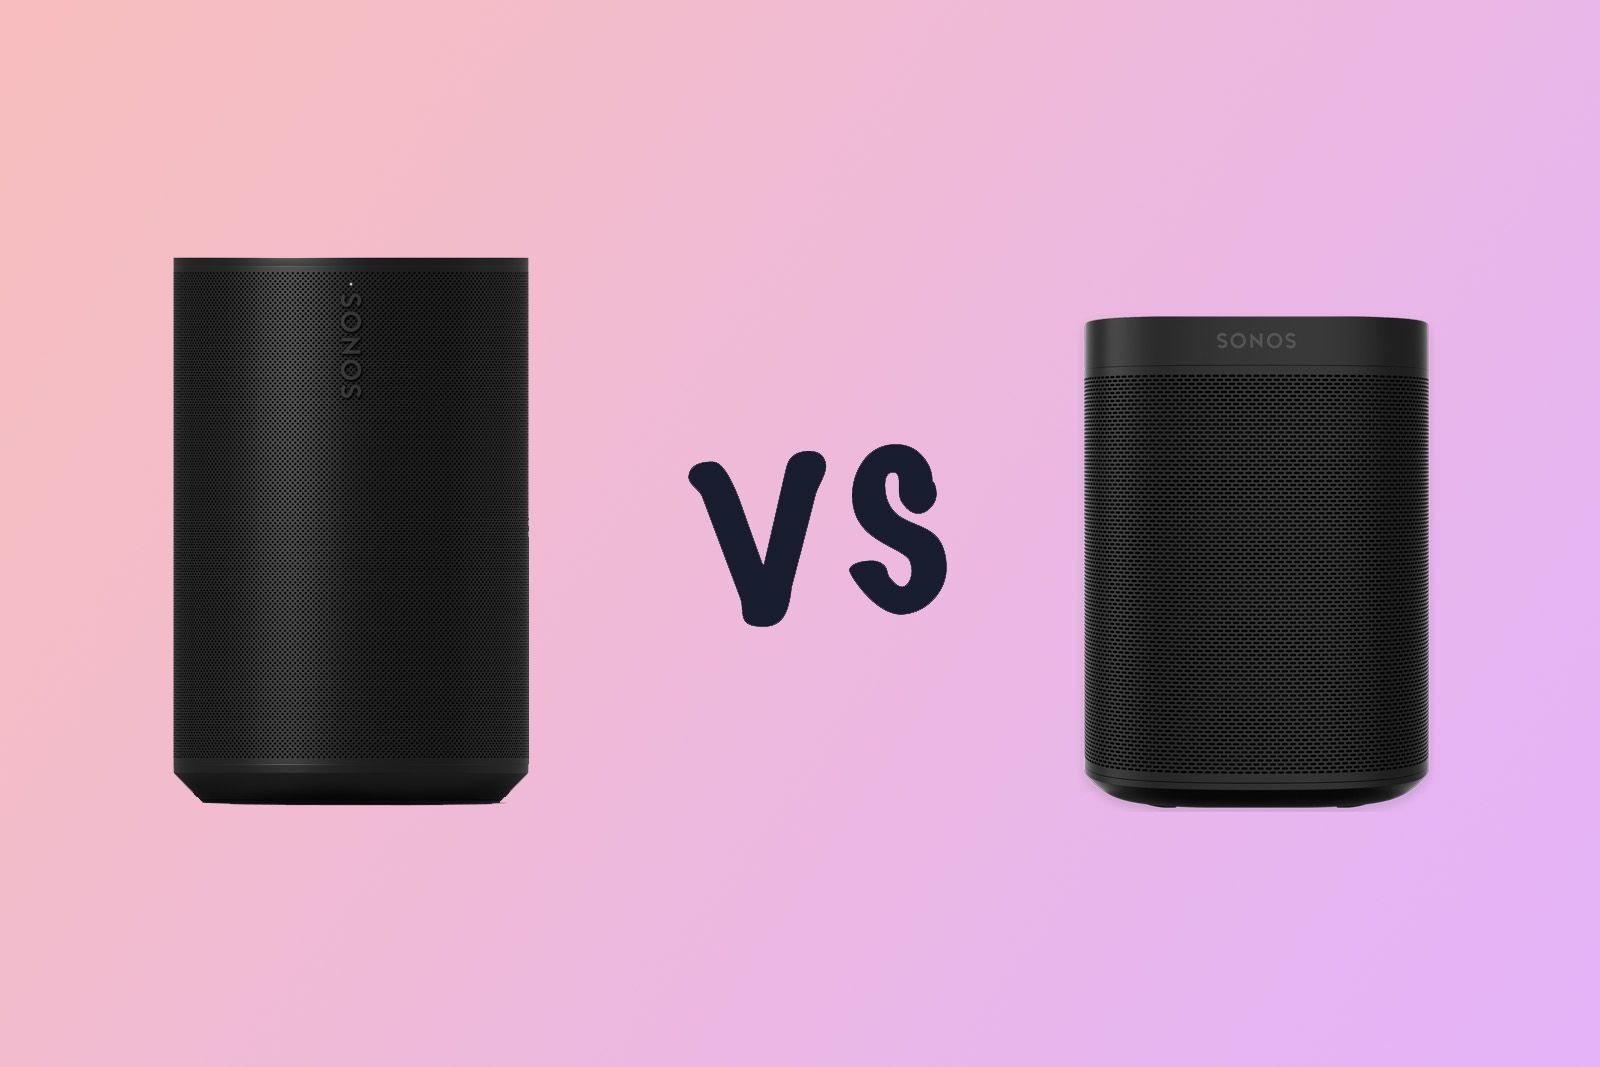 Sonos Era 100 vs. Sonos One: What's the difference?